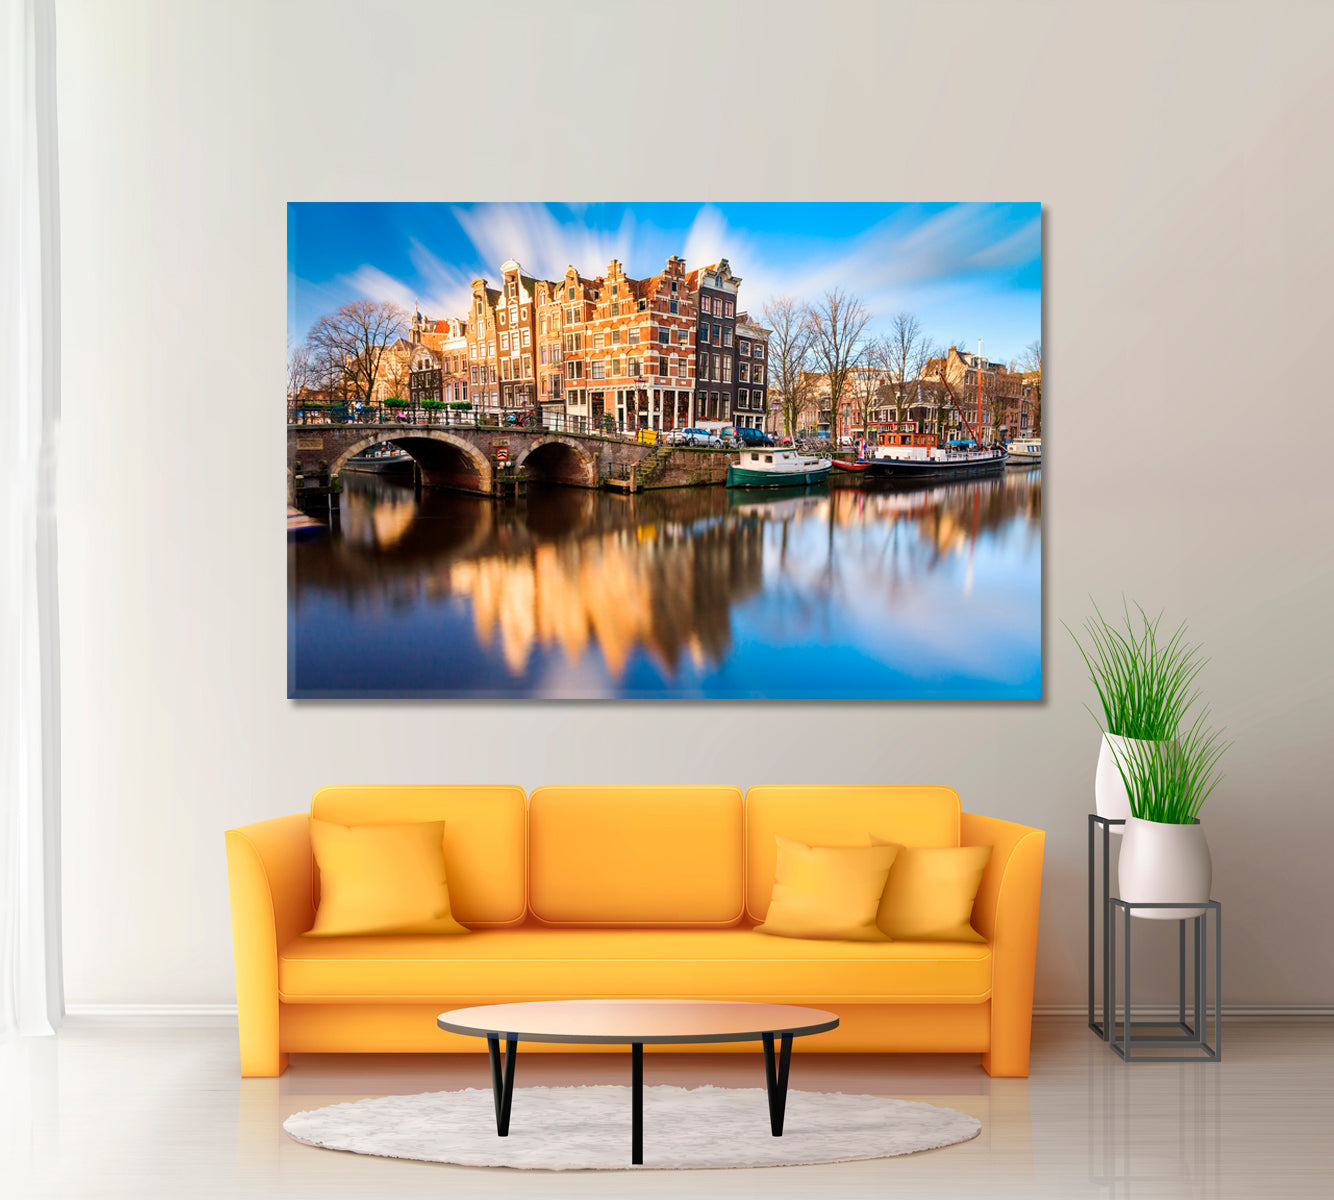 Prinsengracht and Brouwersgracht Canals Amsterdam Netherlands Canvas Print ArtLexy 1 Panel 24"x16" inches 